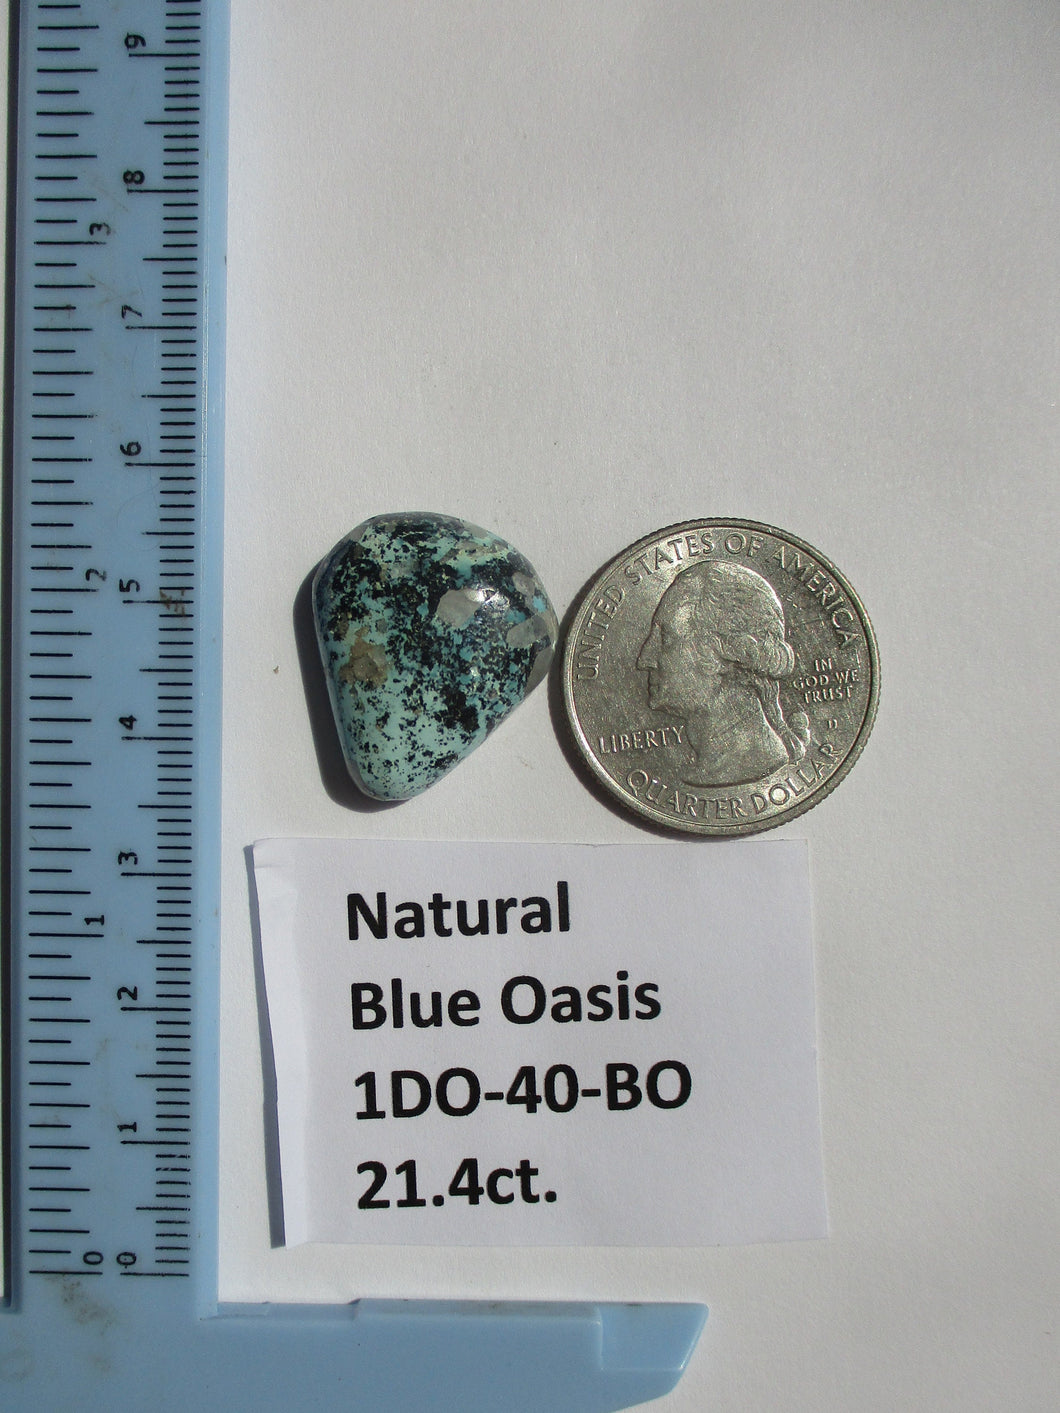 21.4 ct. (20x8x5 mm) Natural Blue Oasis Turquoise (backed) Cabochon Gemstone, 1DO 40